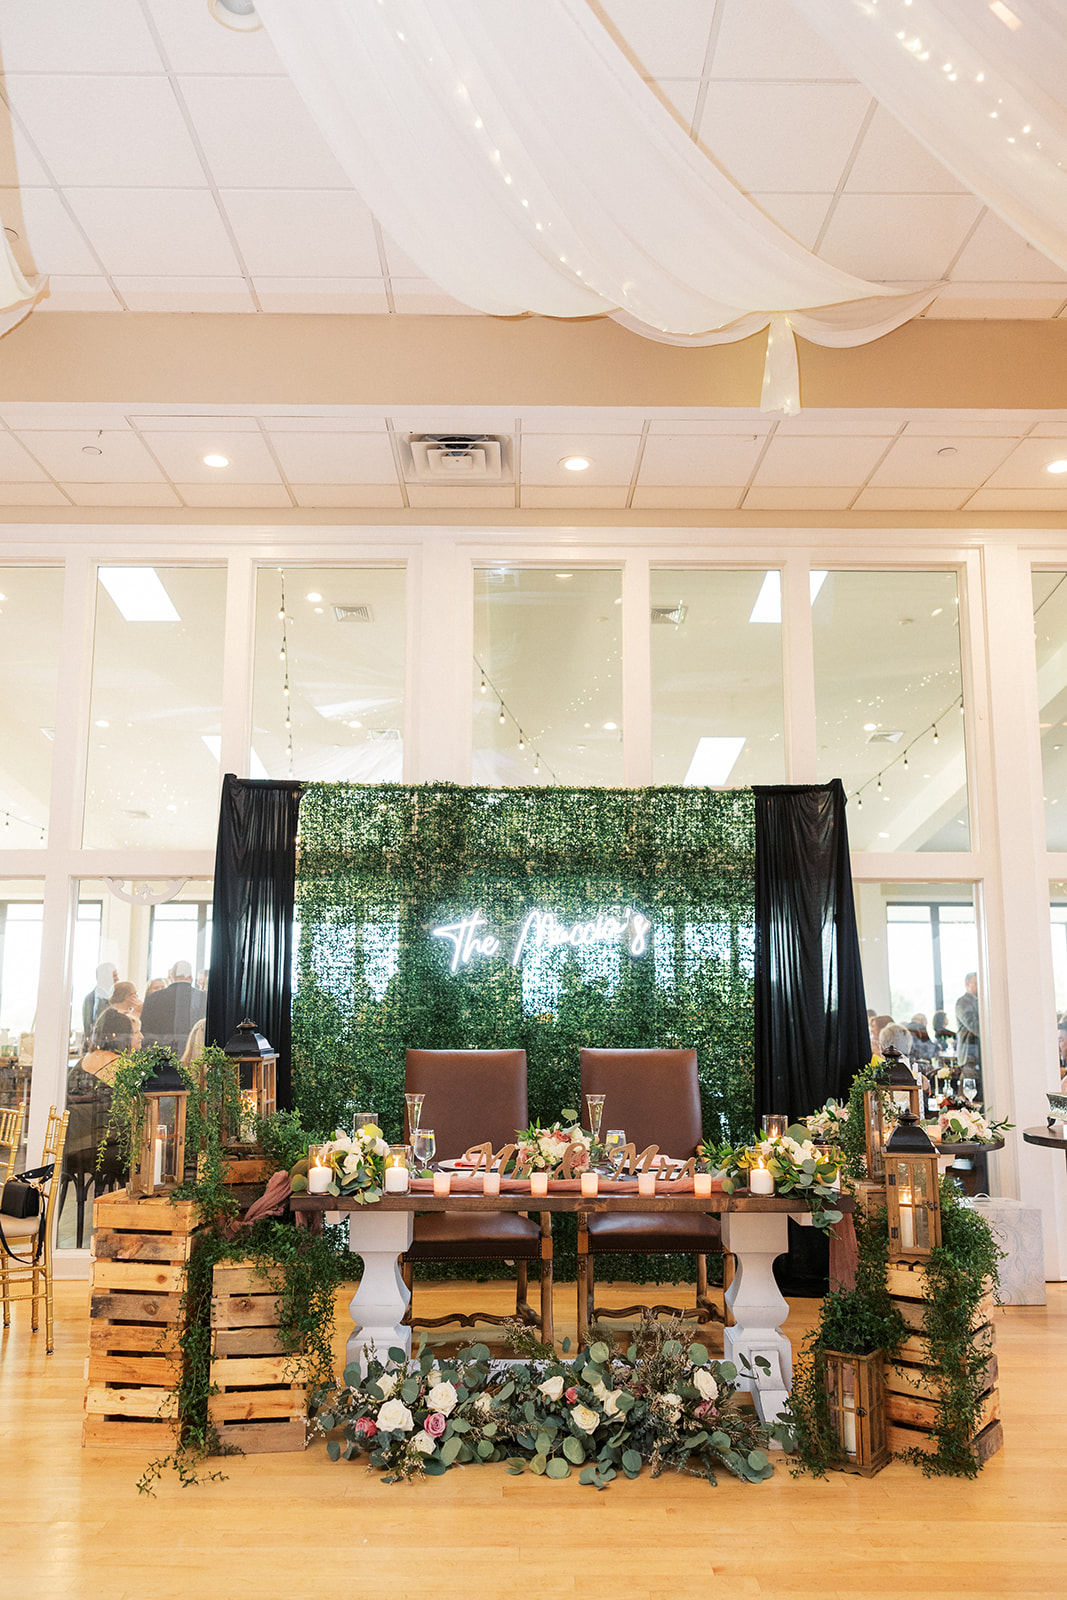 Details of a wedding head table covered in greenery in front of a greenery wall